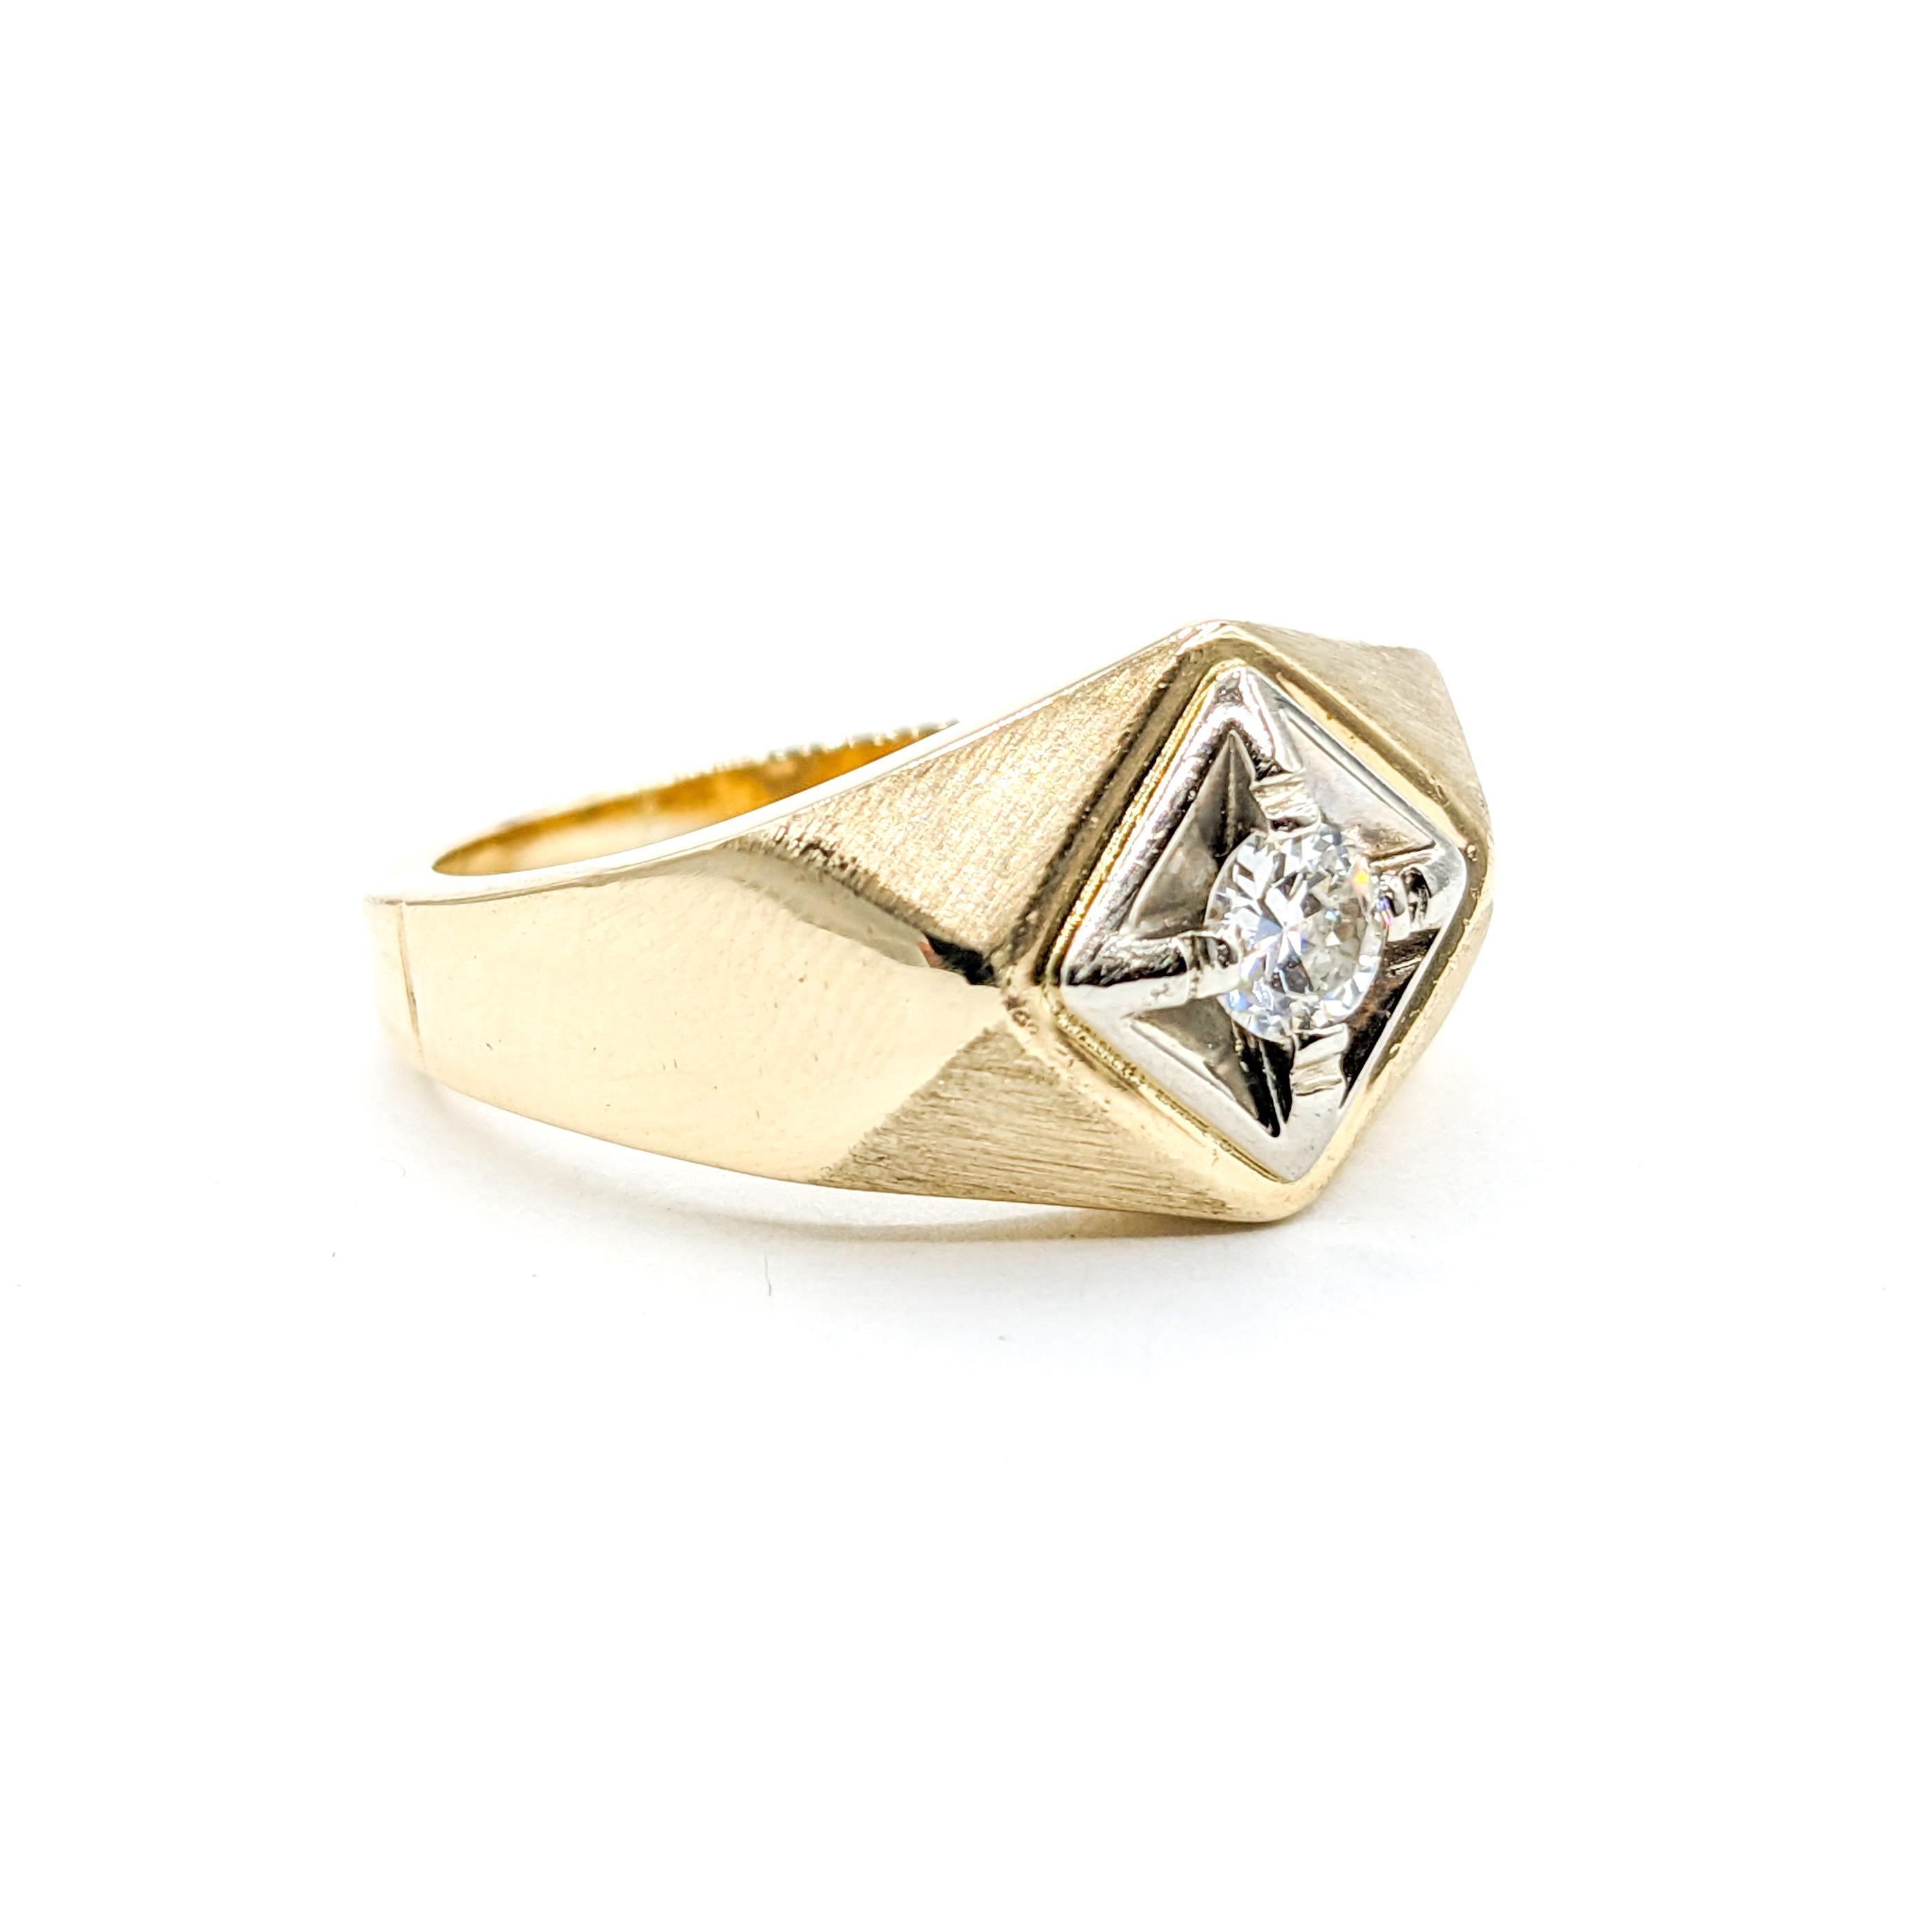 Vintage Old European Cut Diamond Men's Ring in Gold

Introducing this very cool vintage Men's ring 14K yellow gold ring, showcasing a dazzling 0.35ct Old European Diamond at its center. With SI clarity and a near-colorless hue, this diamond emanates